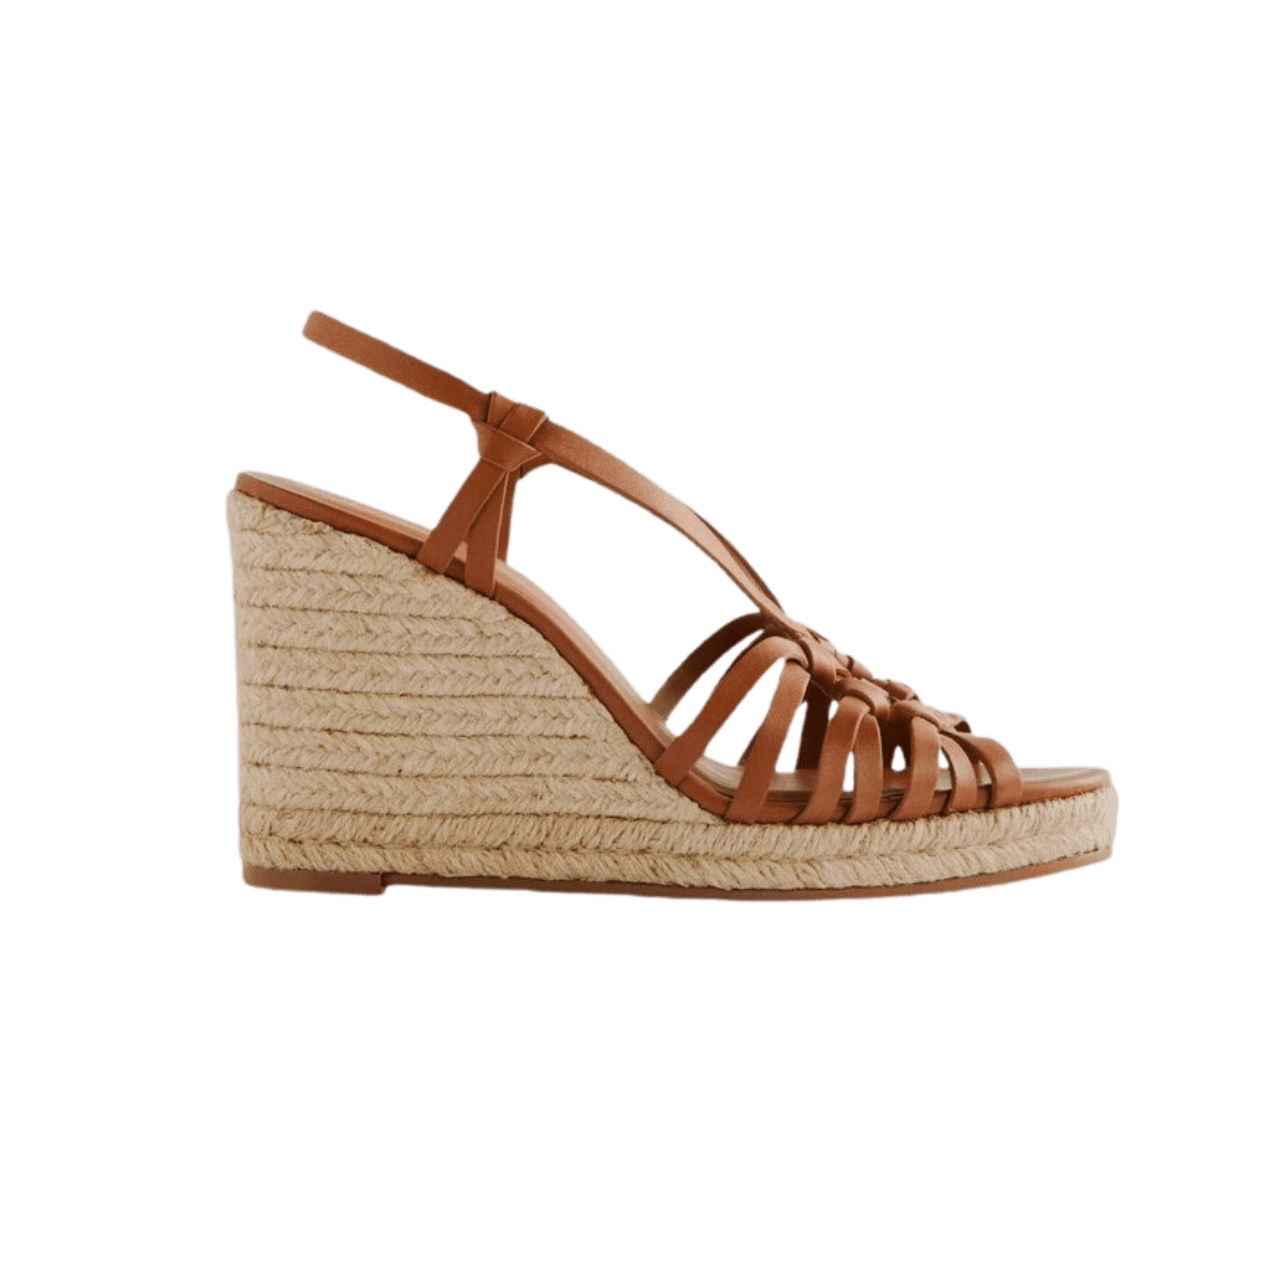 Reformation Candice woven wedge espadrilles